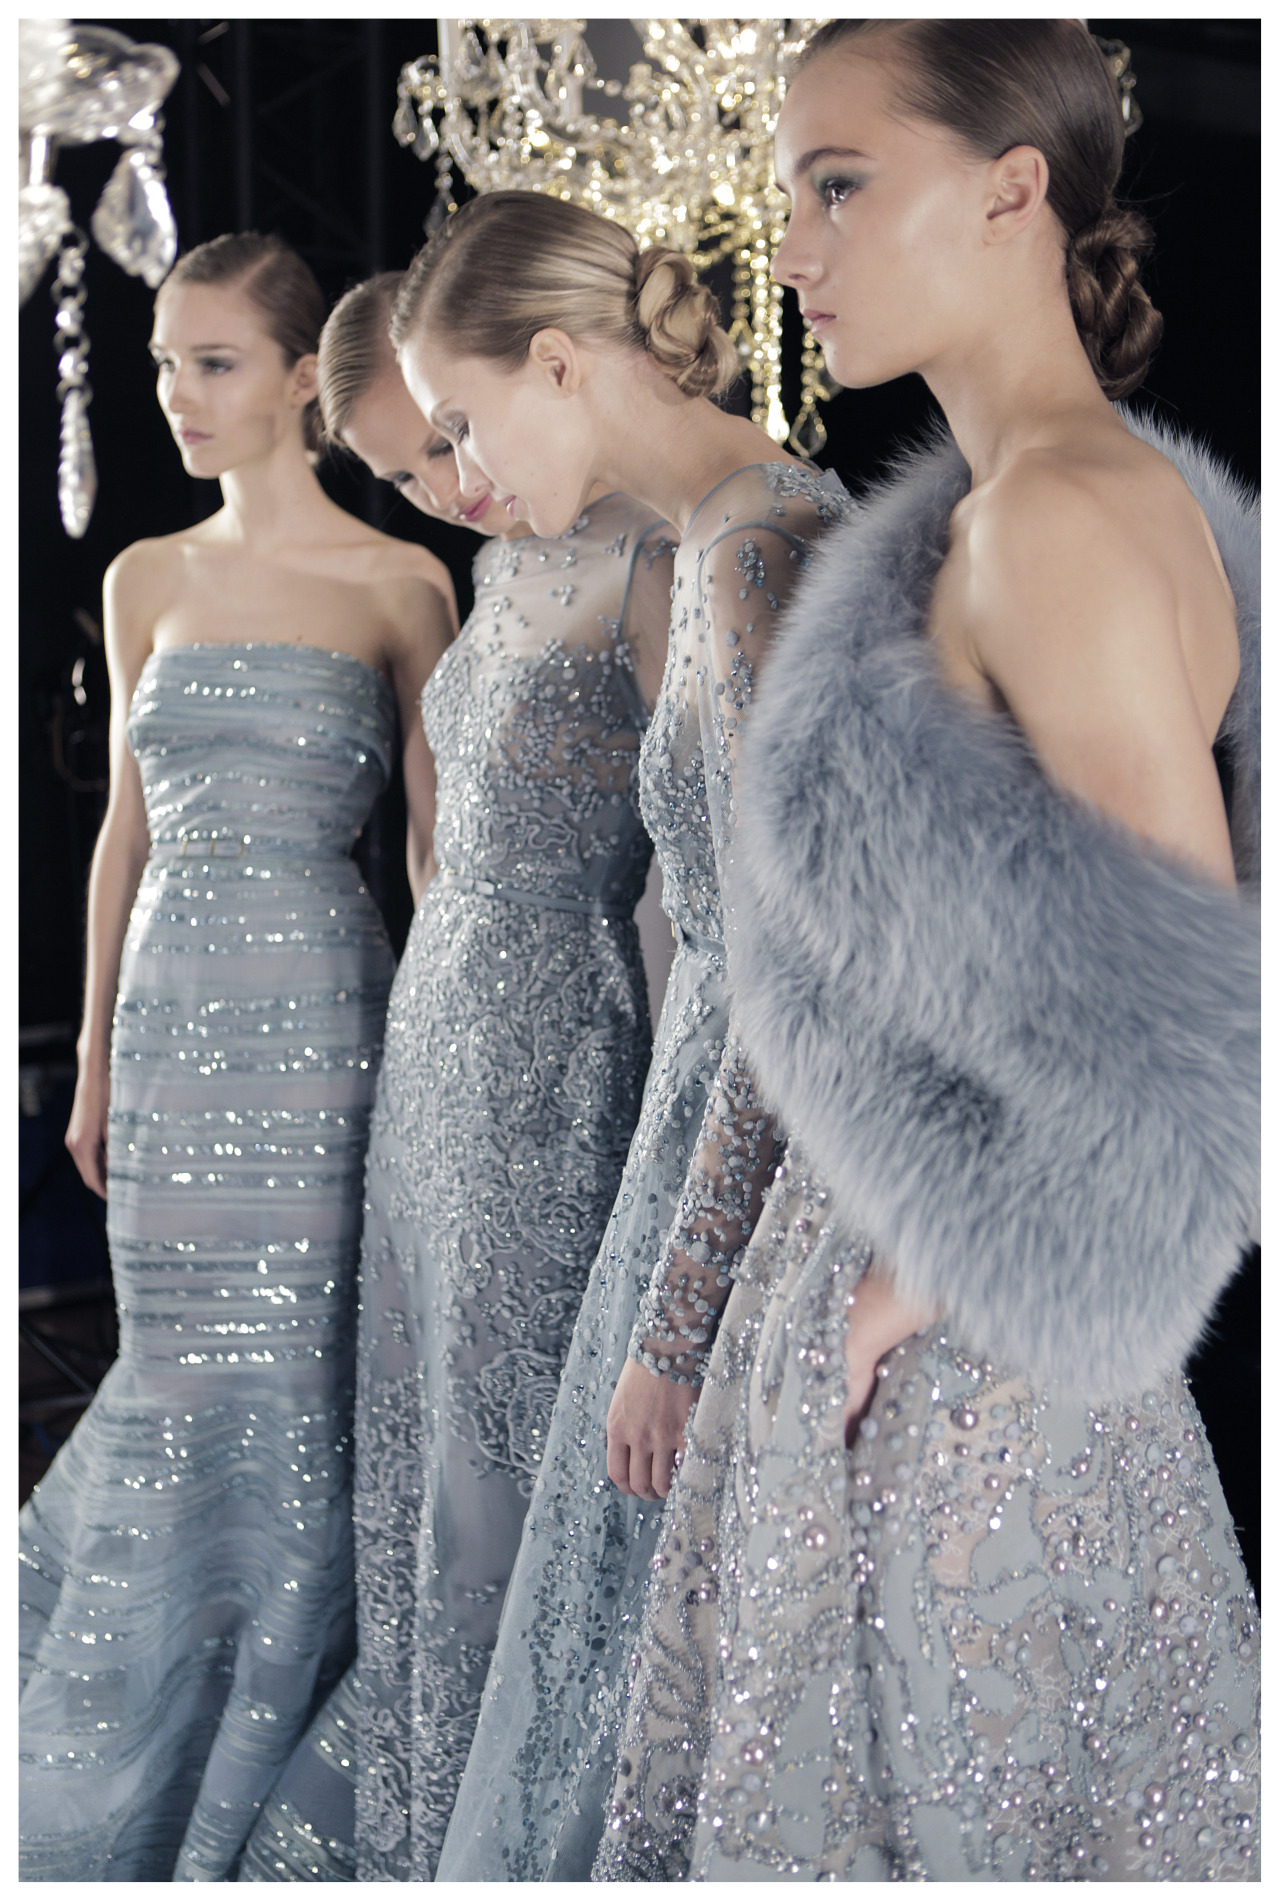 eliesaab:  Backstage, the message was clear that the show was about to take place